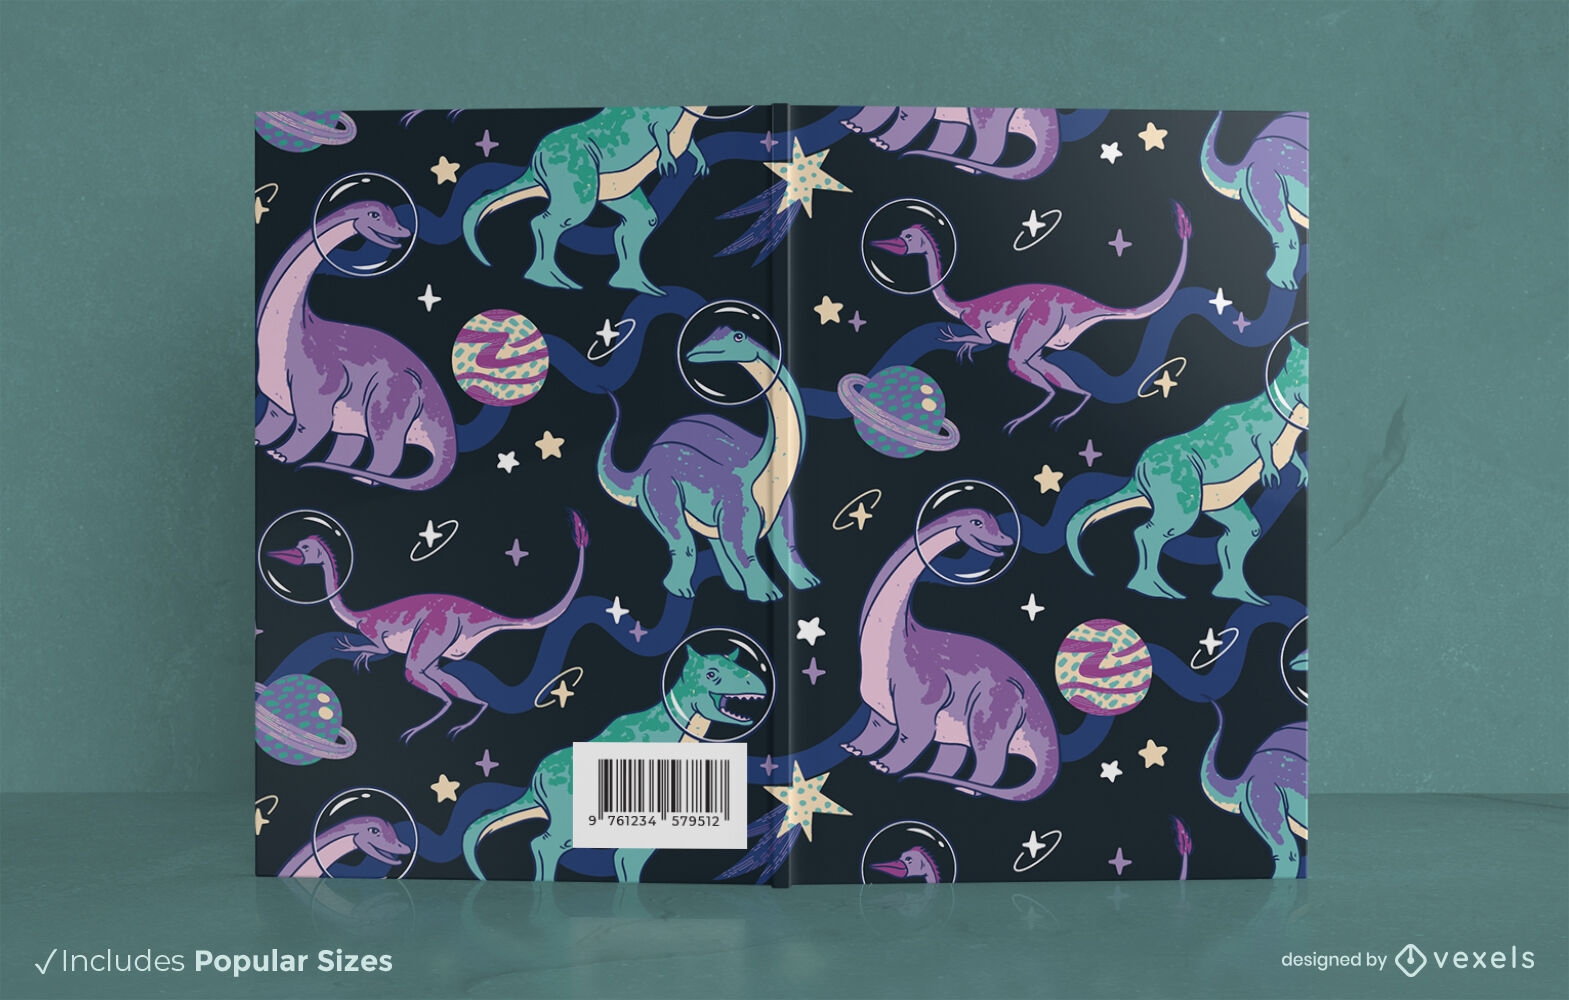 Dinosaurs in space book cover design